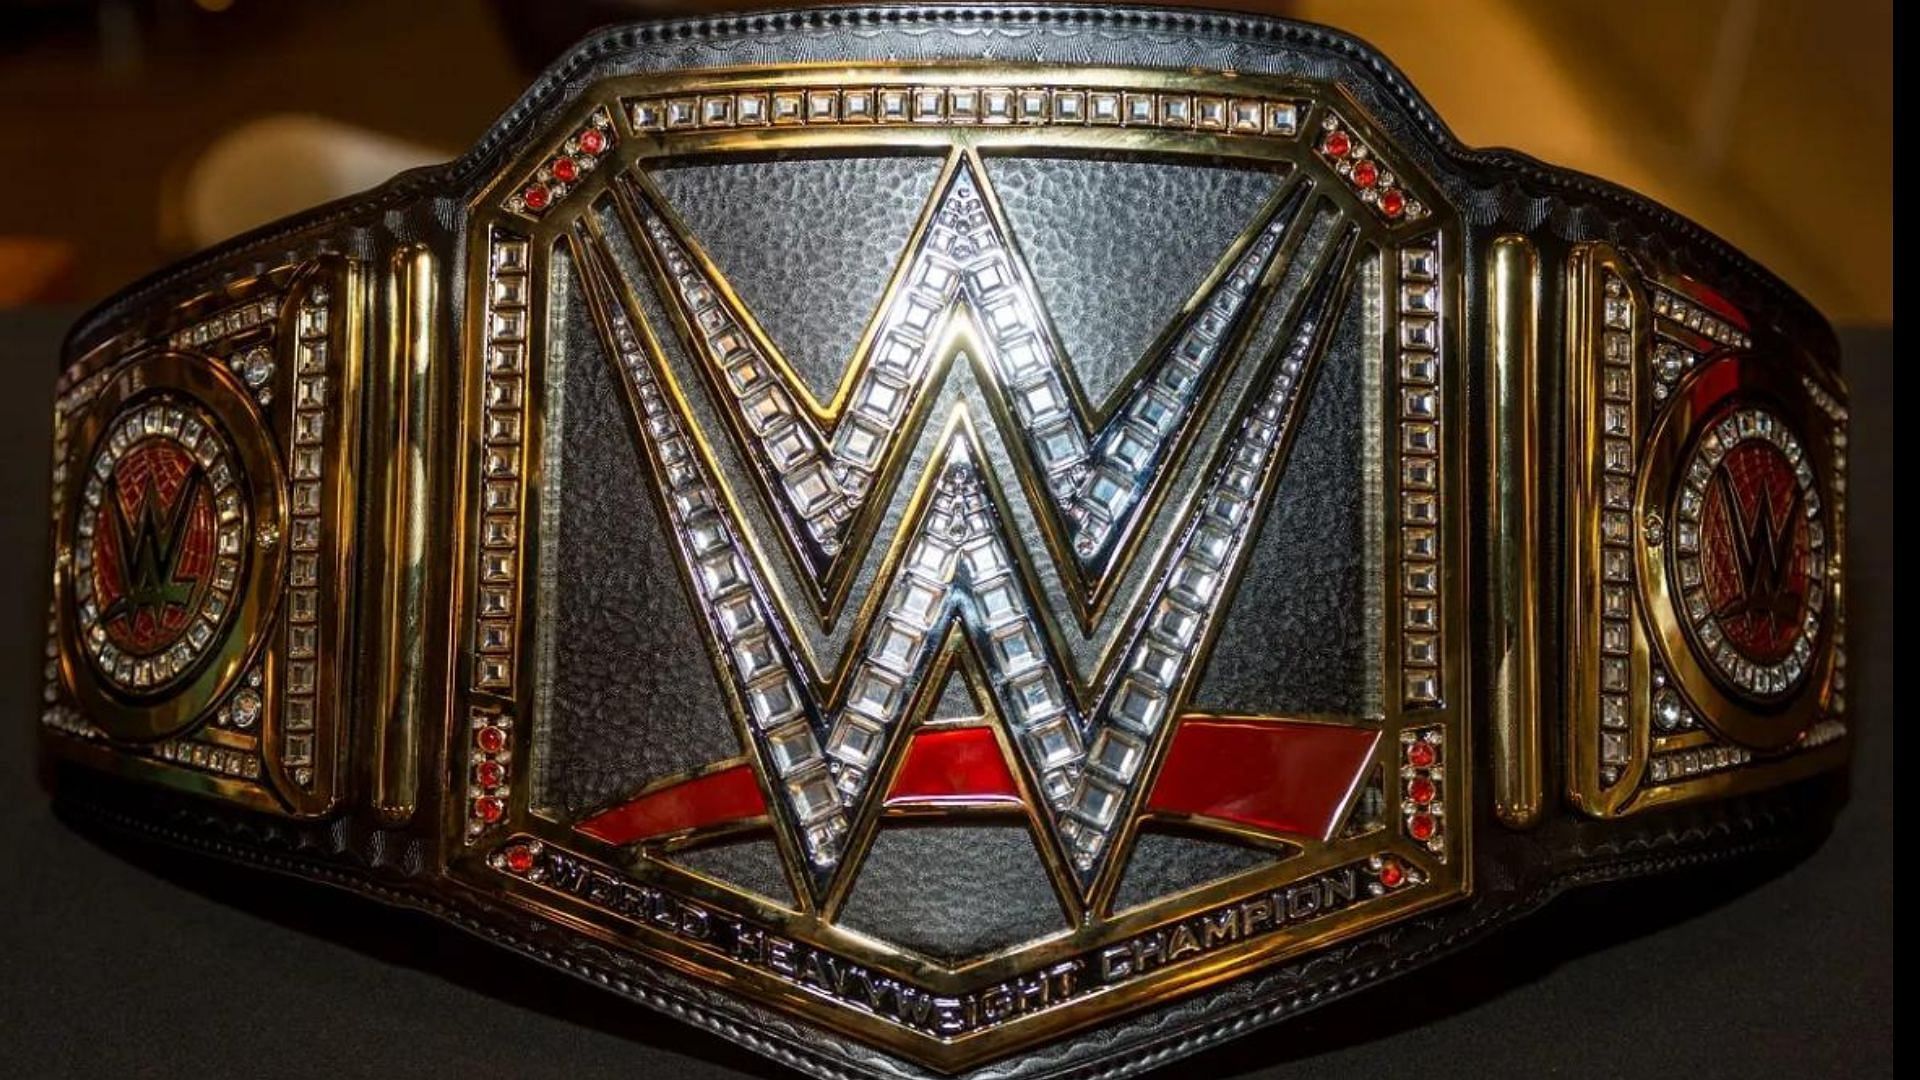 The WWE Championship is one of the most iconic belts in the promotion